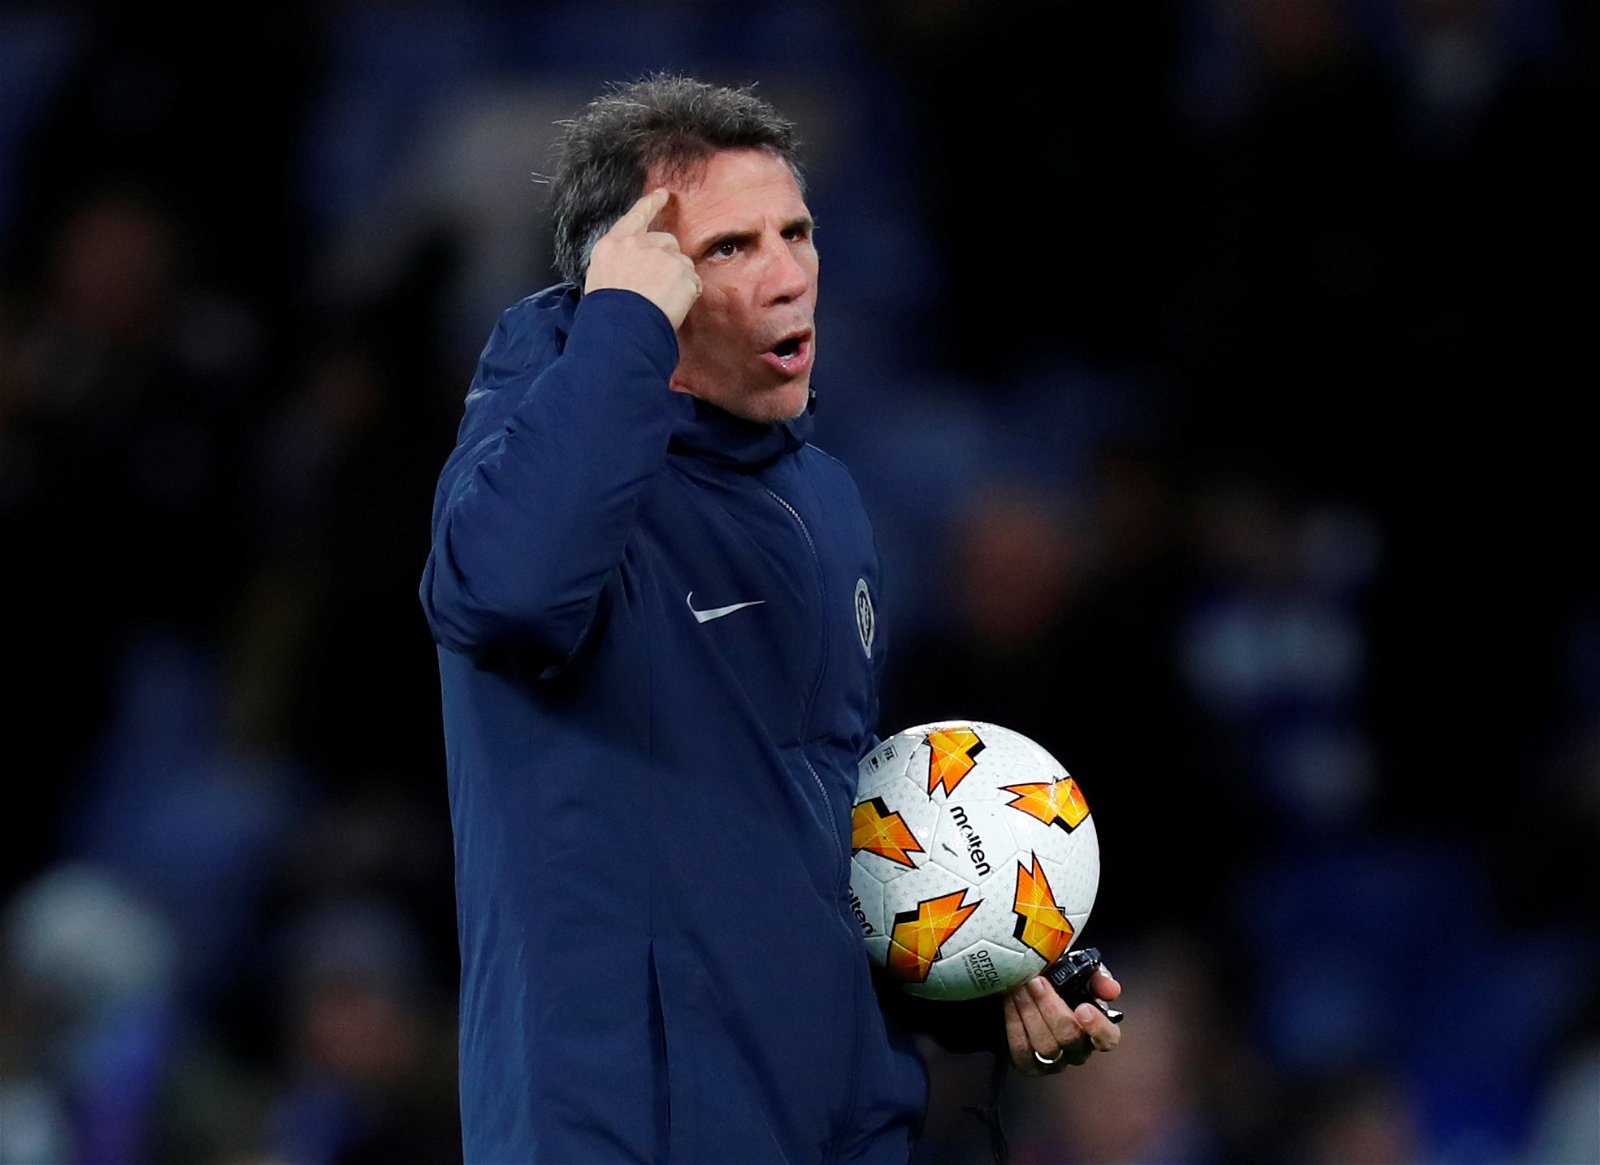 Zola says second half substitutions made the difference for Chelsea